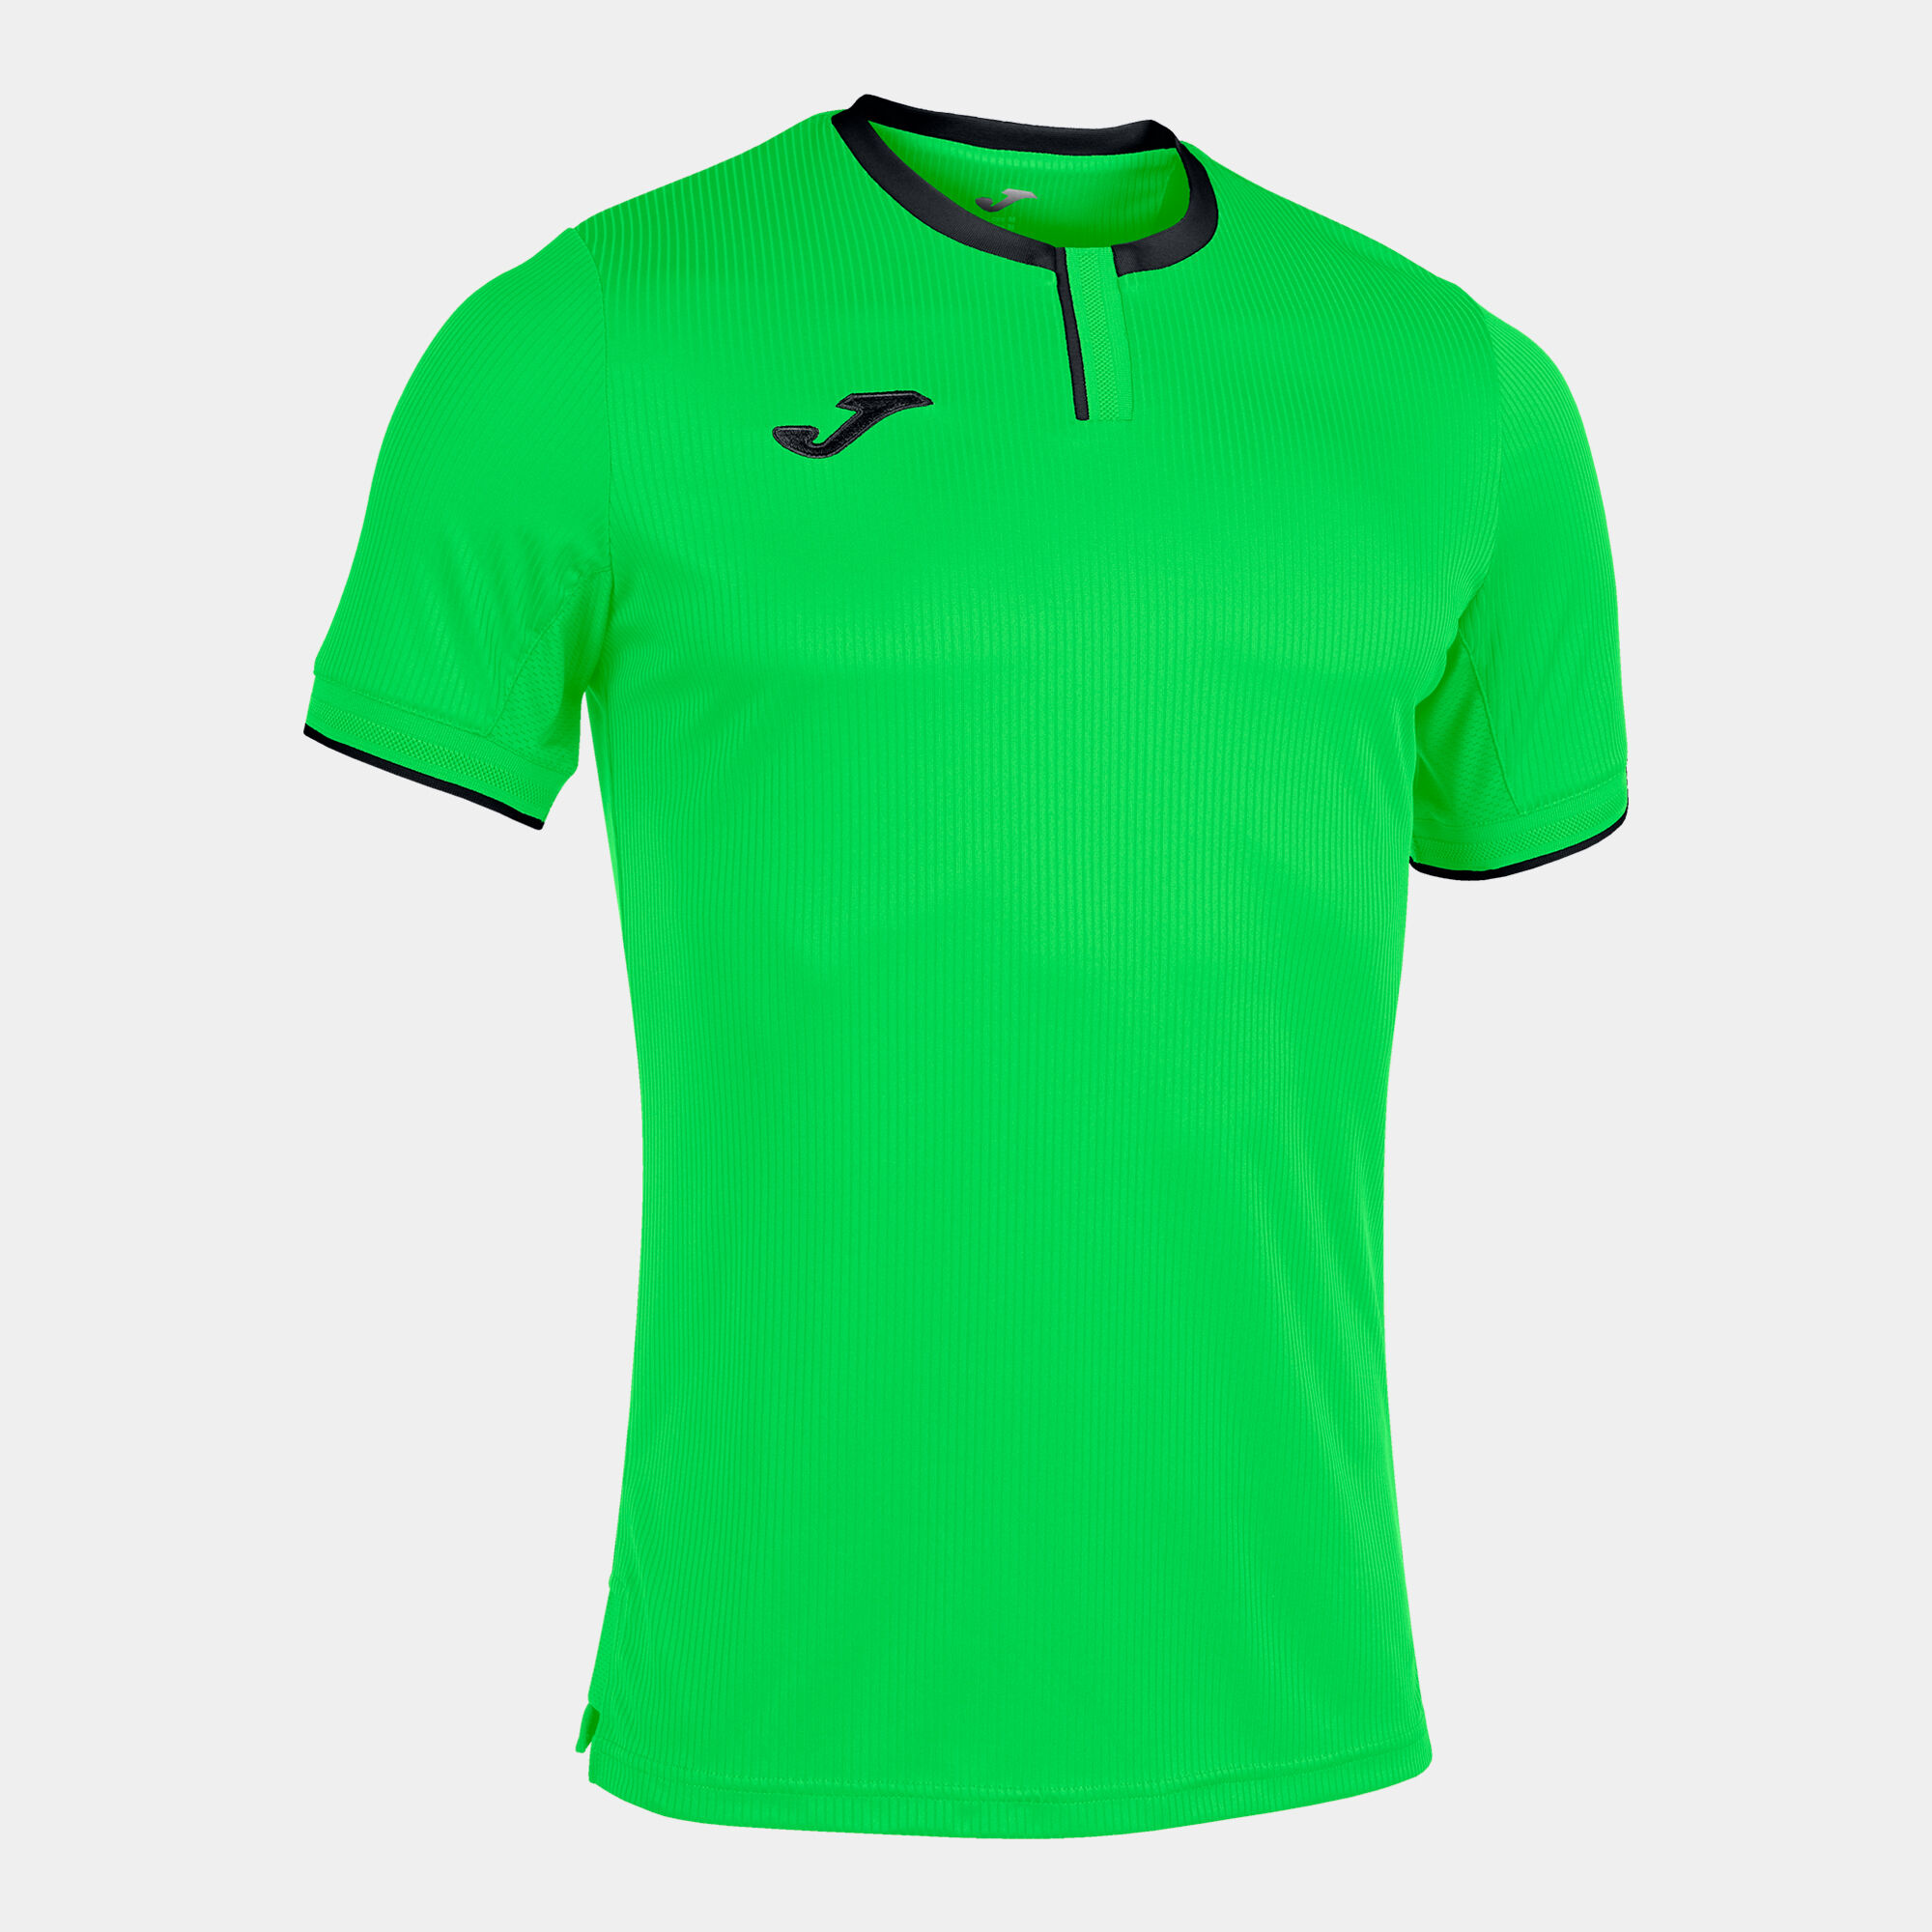 MAILLOT MANCHES COURTES HOMME GOLD III VERT FLUO